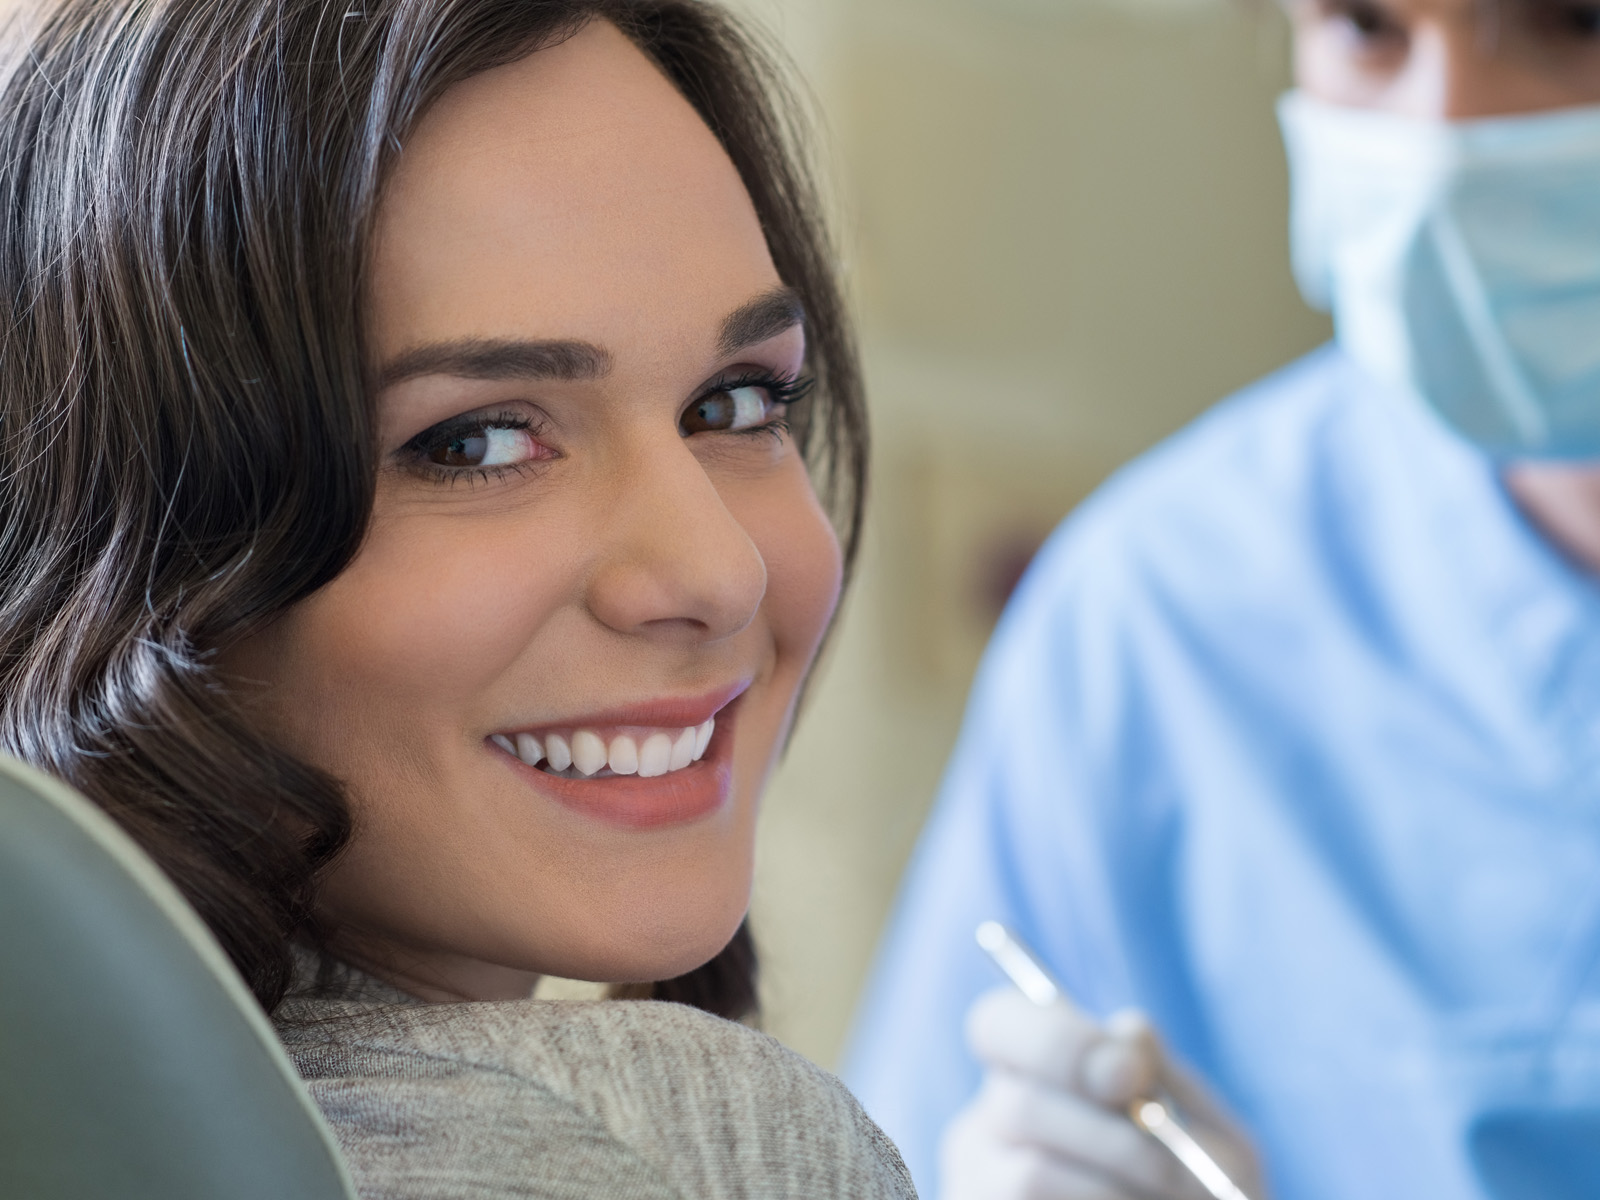 What do people look for in choosing a dentist?